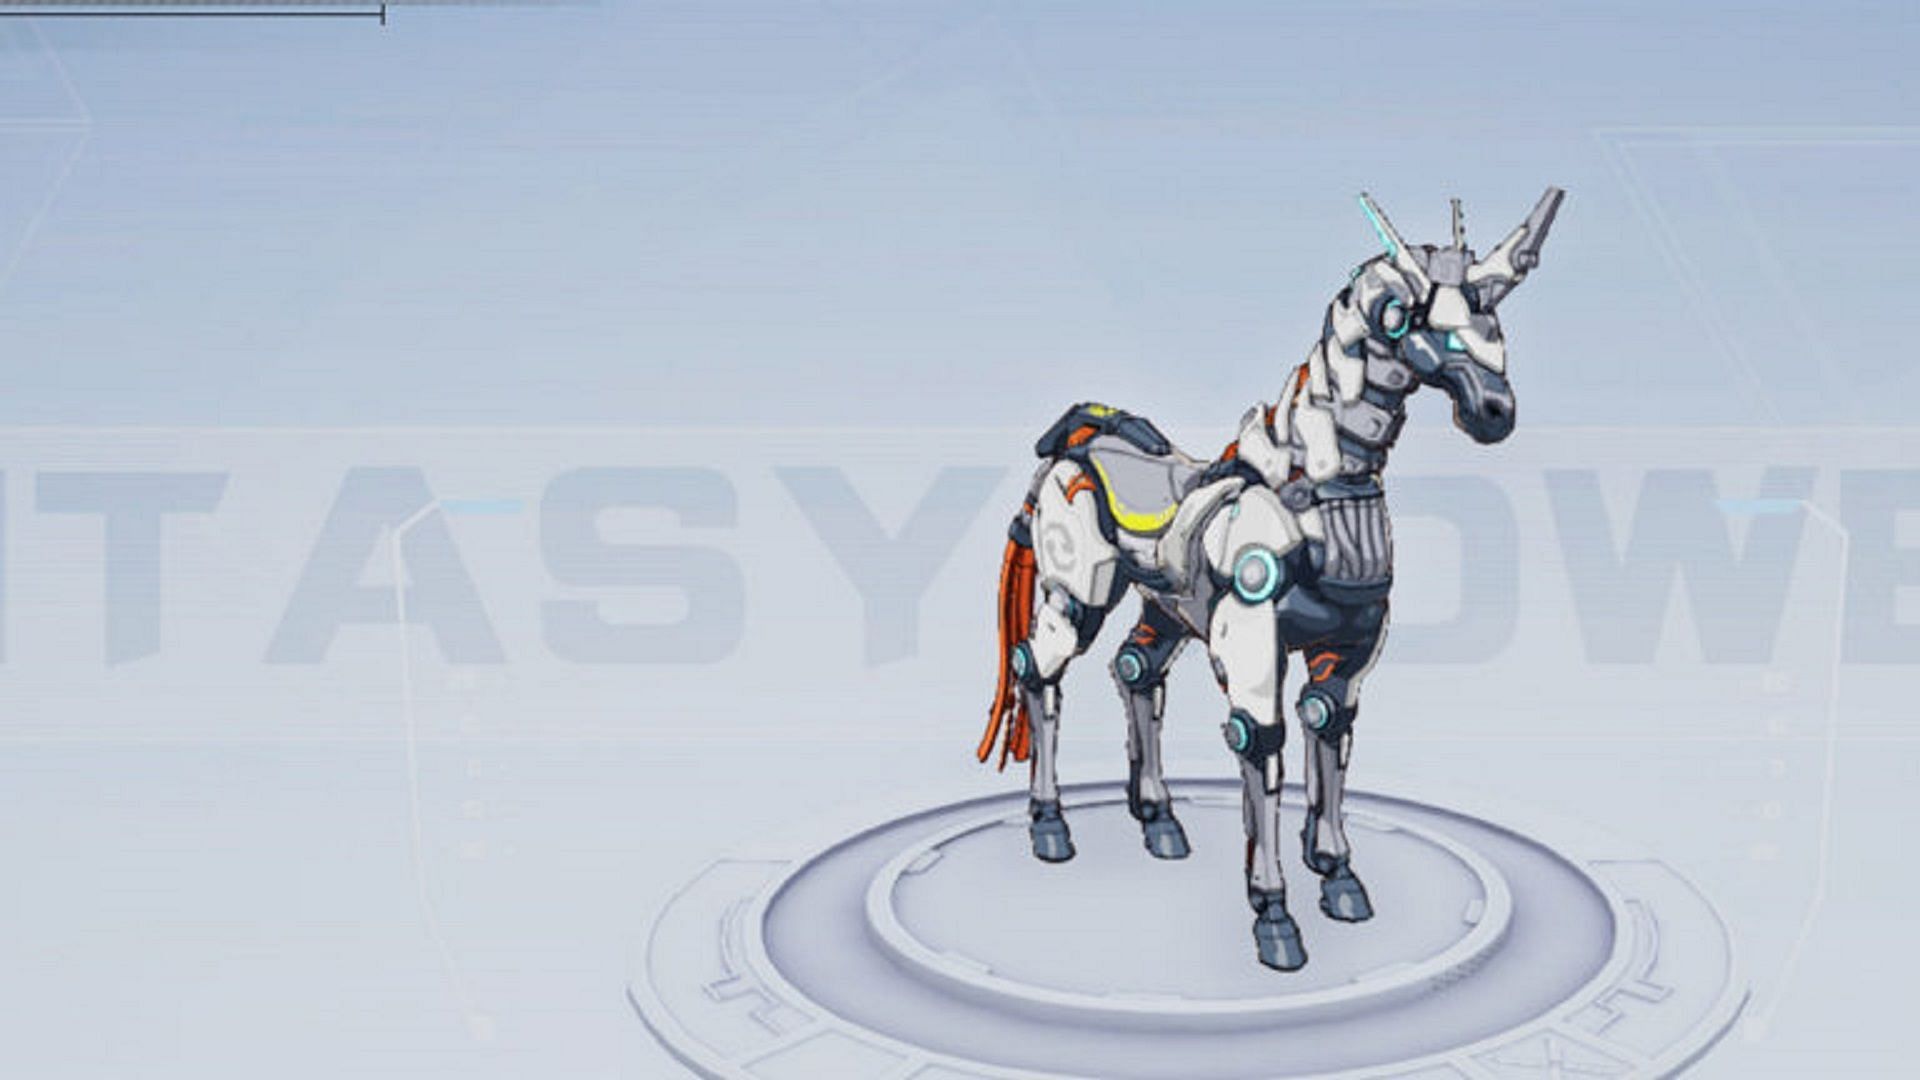 The Monocross mount in Tower of Fantasy can be made using a Unicorn Power Core, Bionic Frame, Cyberlimbs, and Head (Image via Perfect World)